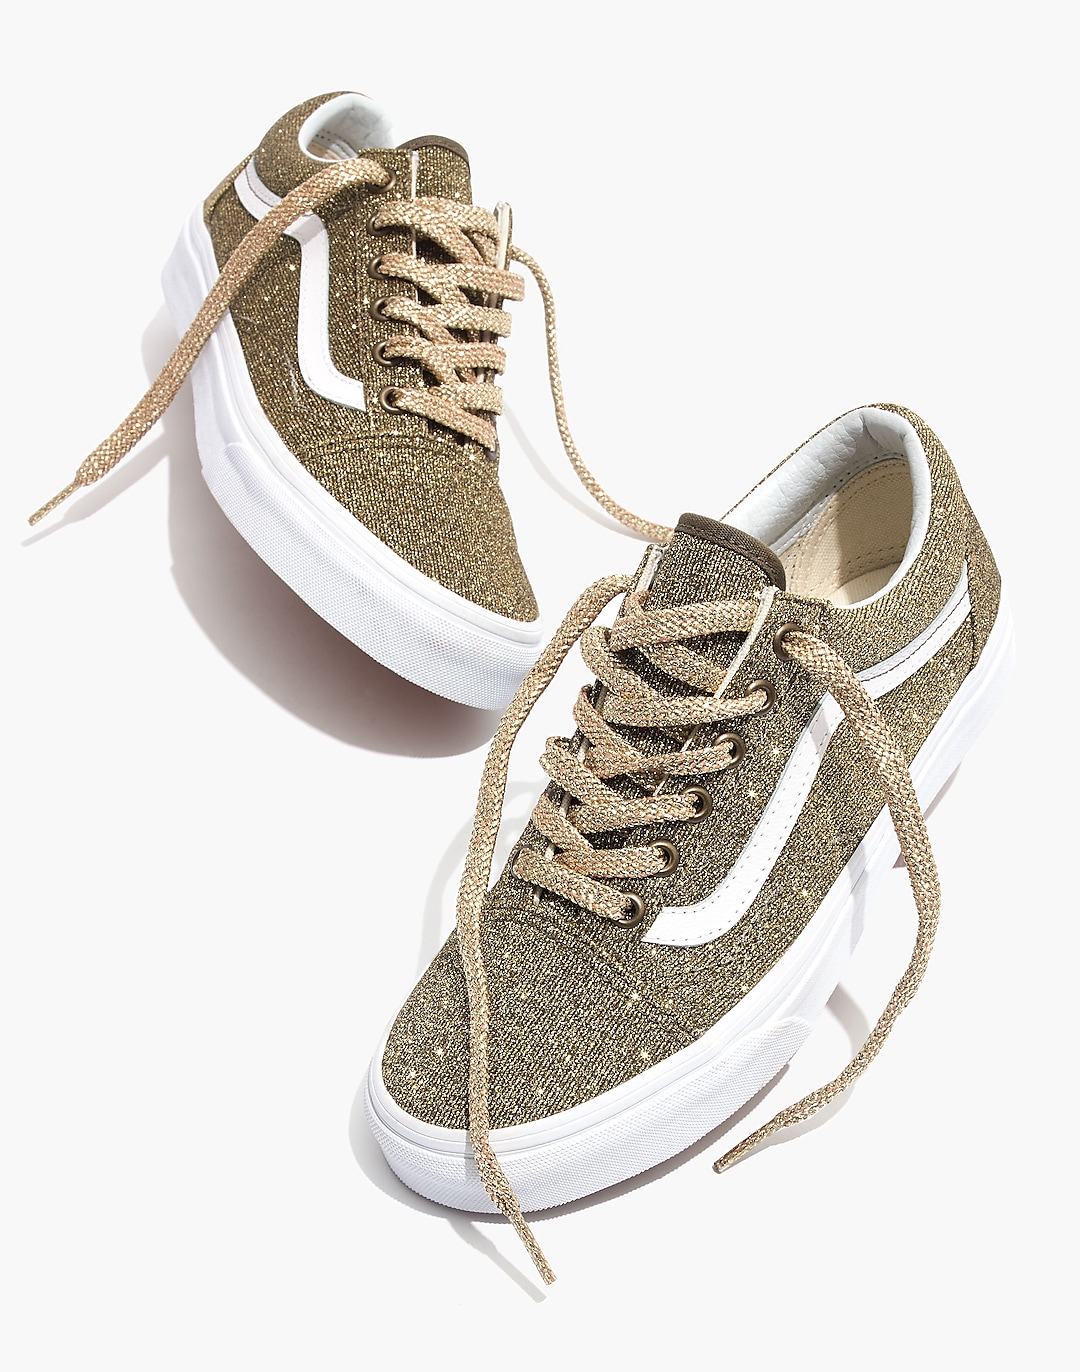 Vans® Unisex Old Skool Lace-Up Sneakers in Gold Glitter